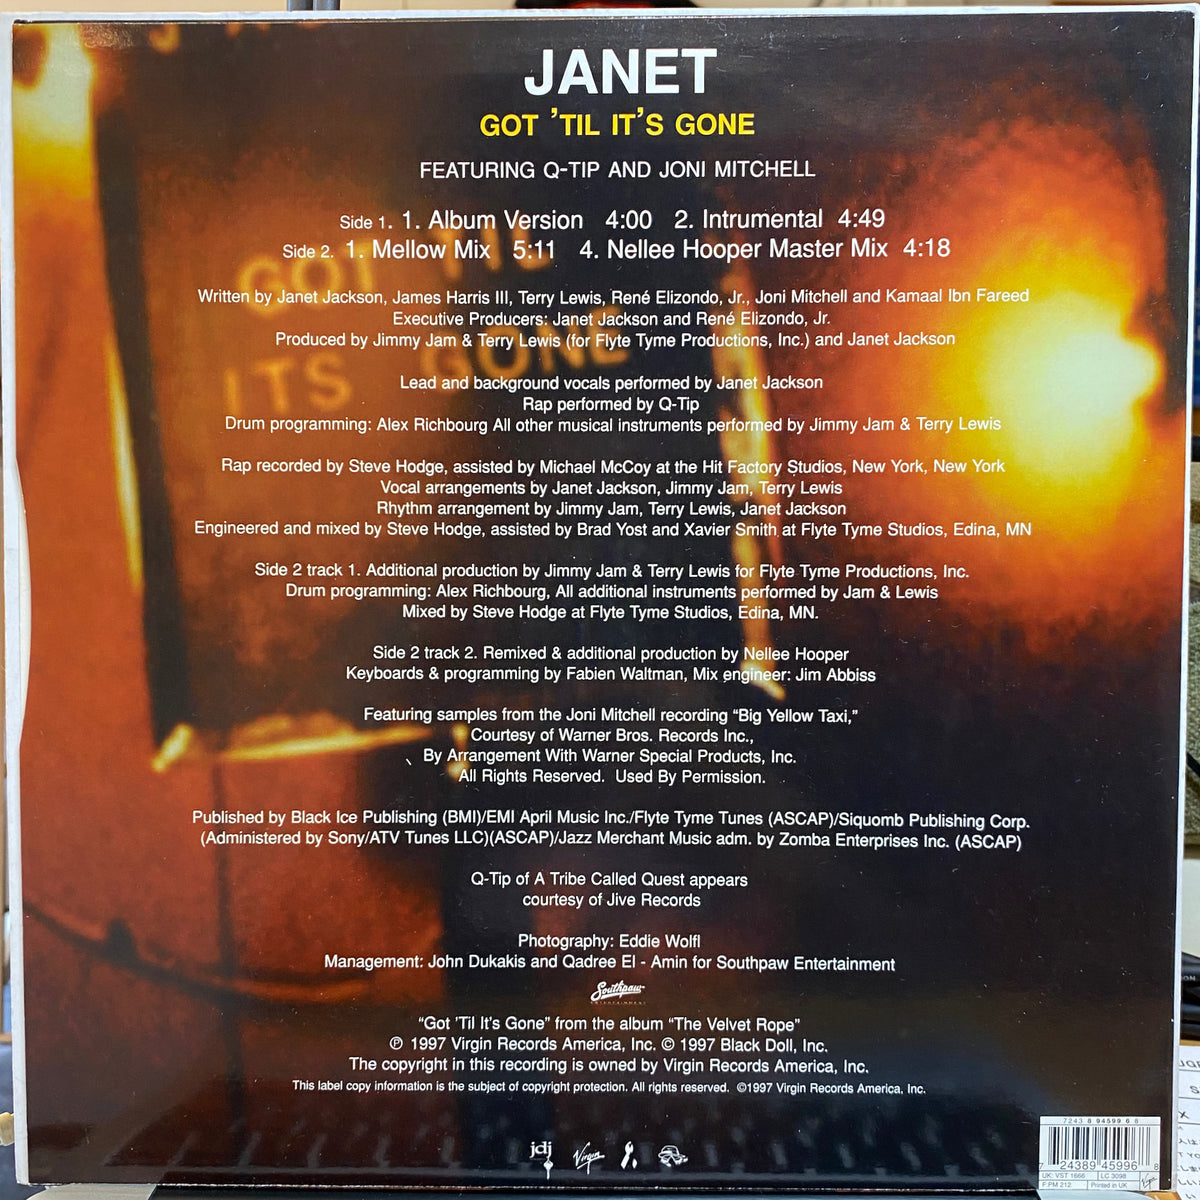 Janet Featuring Q-Tip And Joni Mitchell / Got 'Til It's Gone | VINYL7 